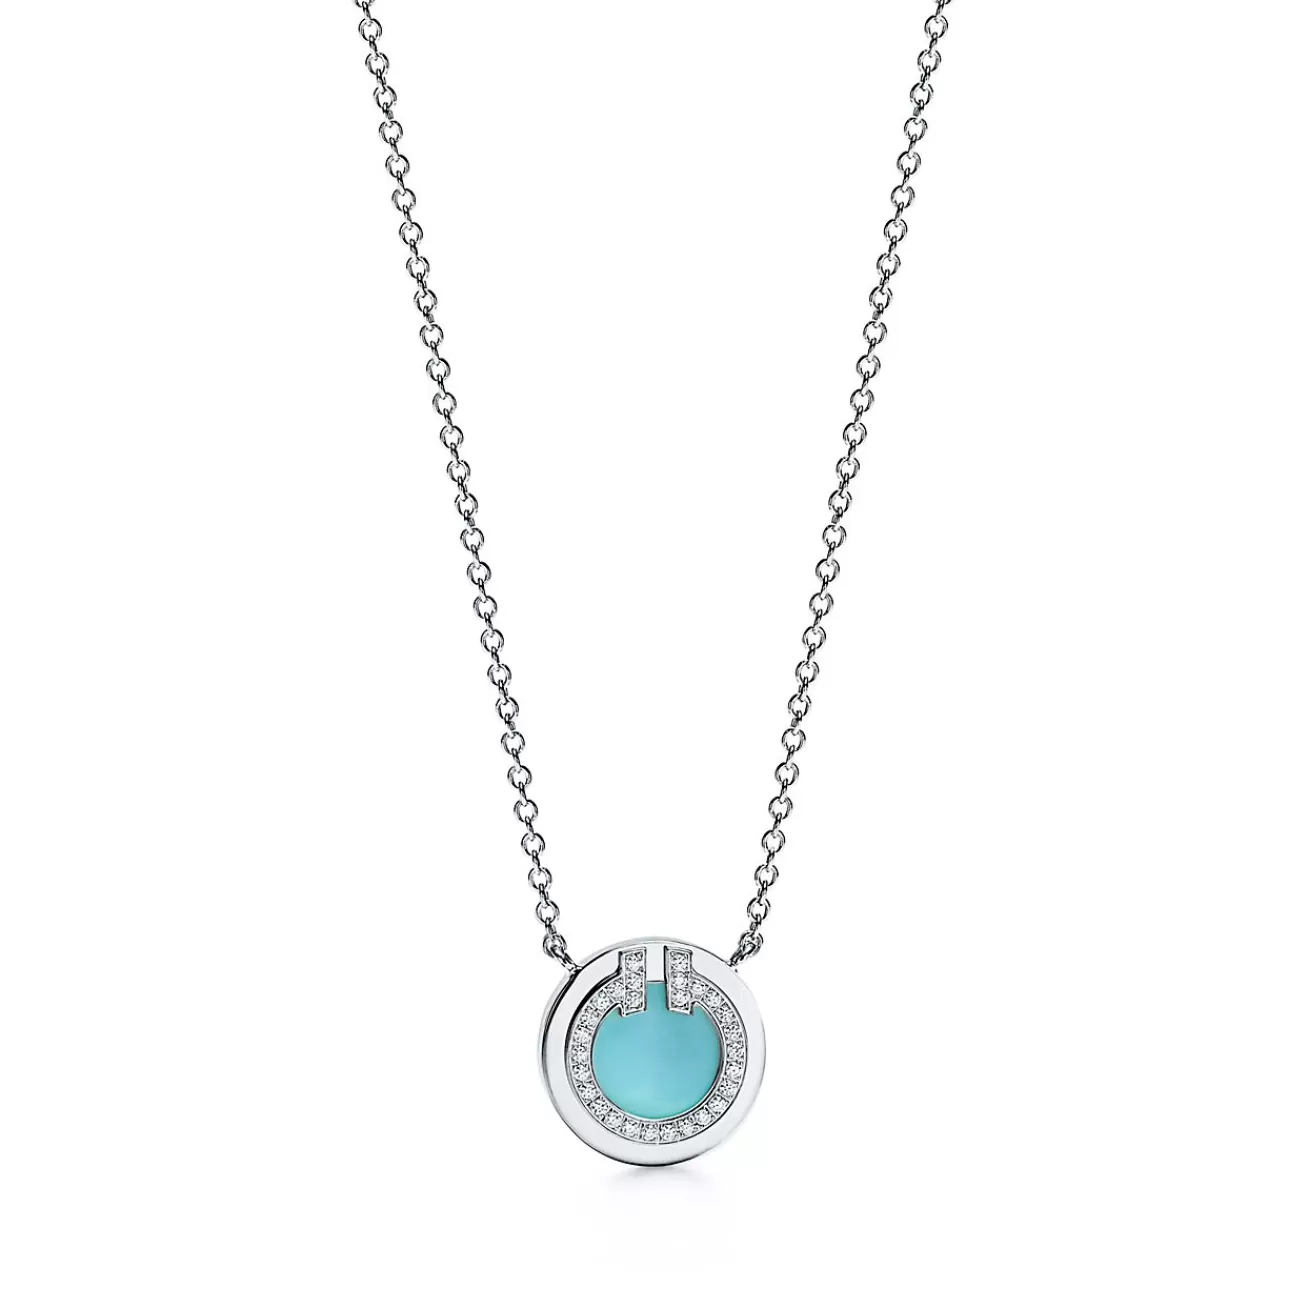 Tiffany & Co. Tiffany T diamond and turquoise circle pendant in 18k white gold, small. | ^ Necklaces & Pendants | Dainty Jewelry